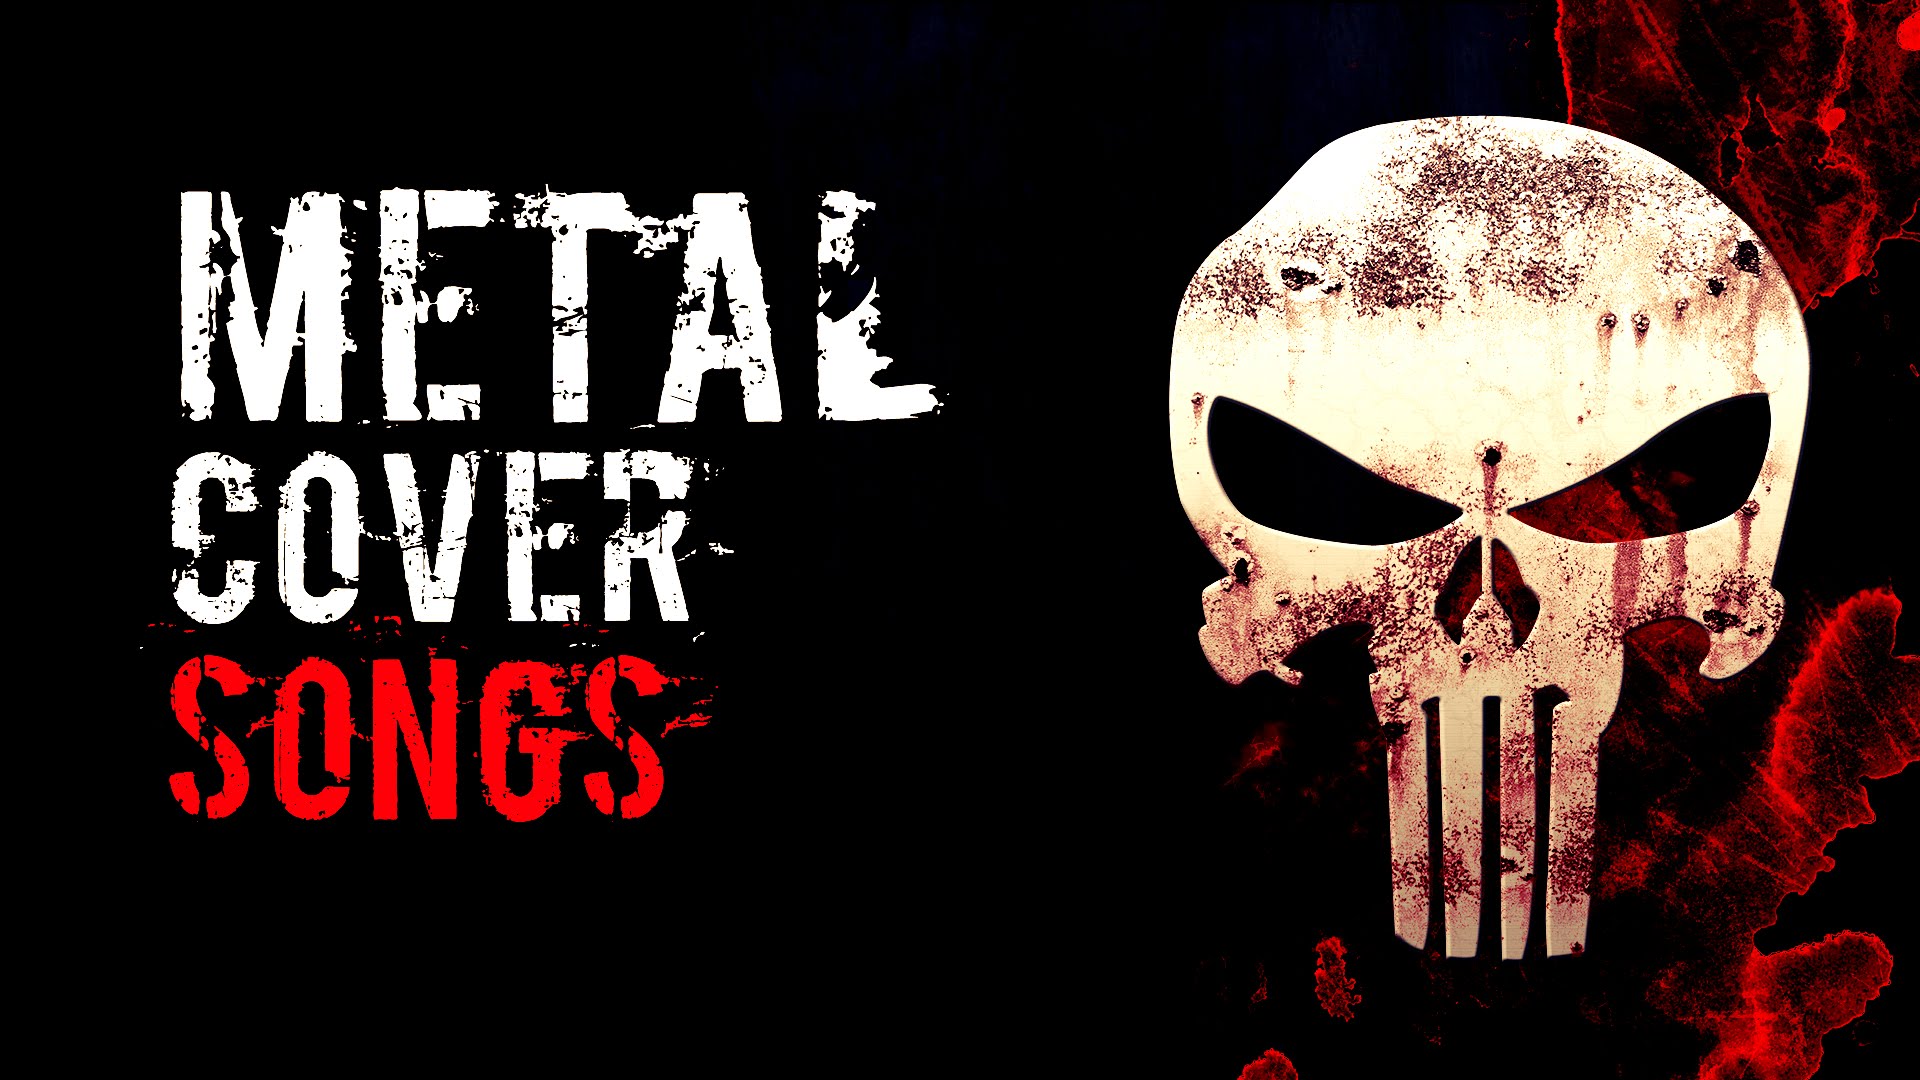 Metal Cover a collection of pop and rock songs in ... - The Spotify  Community